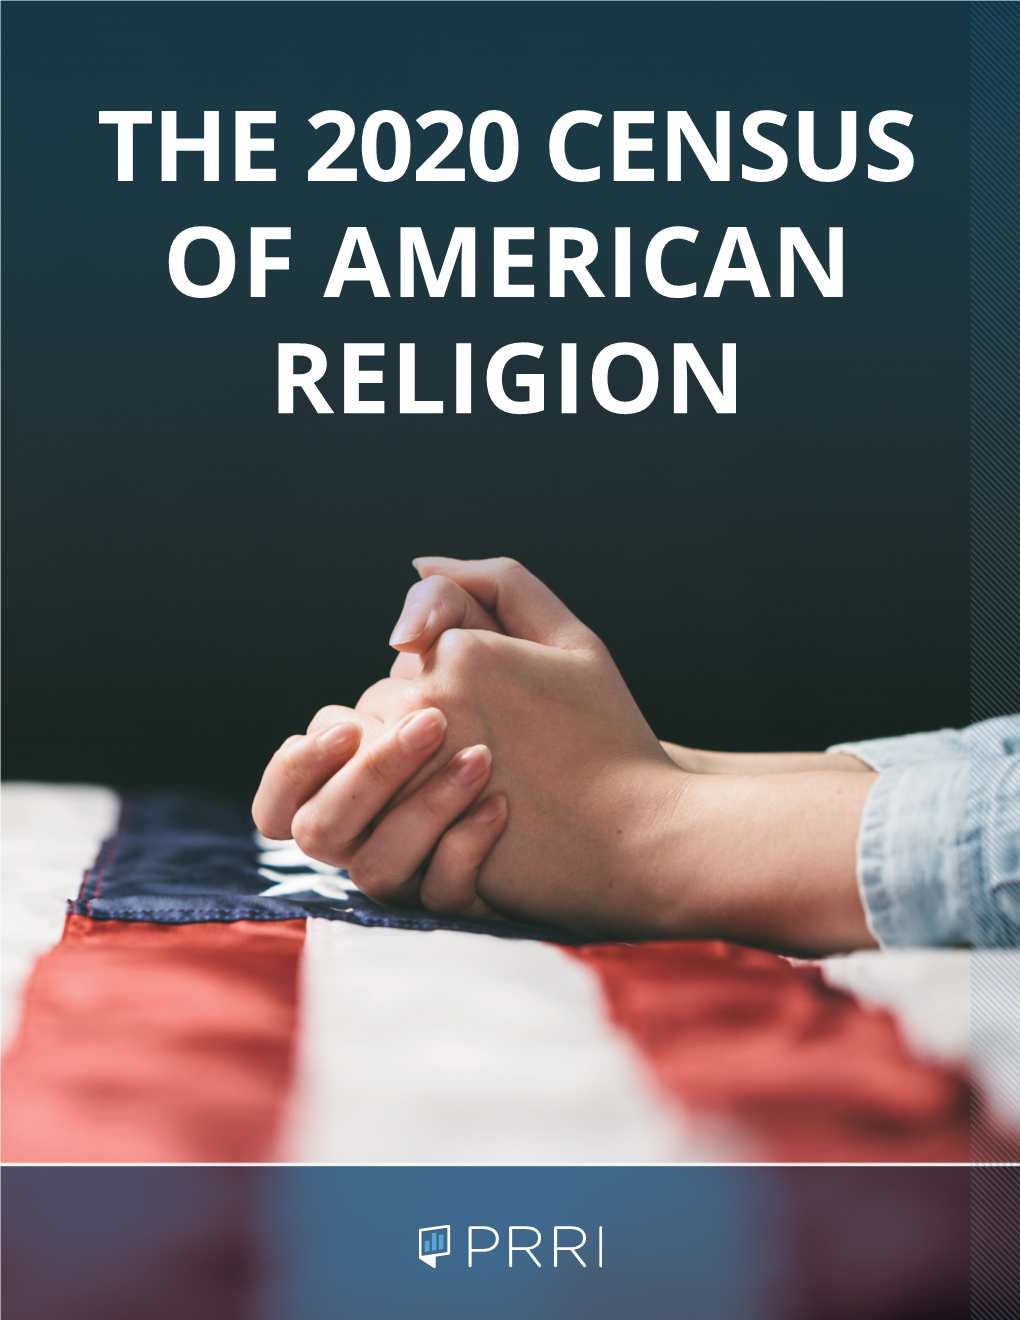 The 2020 Census of American Religion